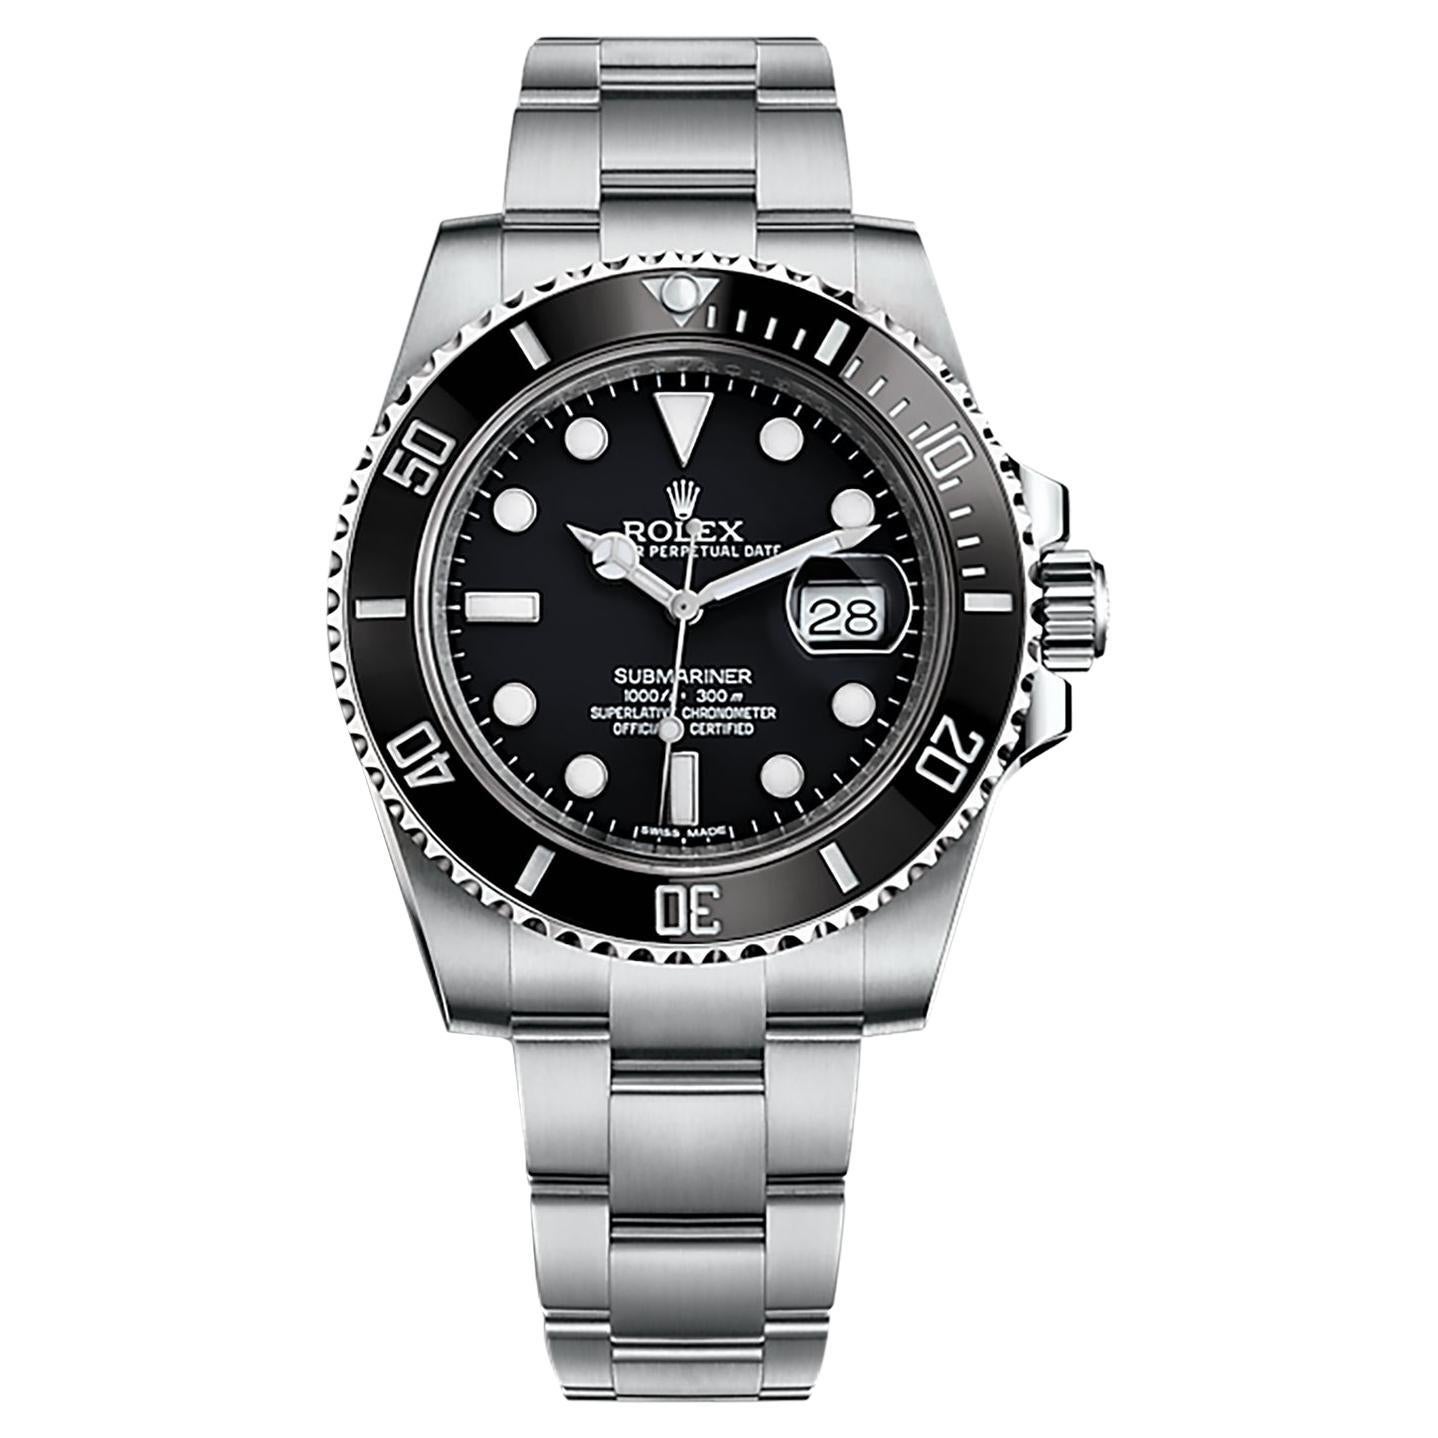 Rolex Submariner Date 41 Black Dial Oyster Stainless Steel Bracelet Watch 16610